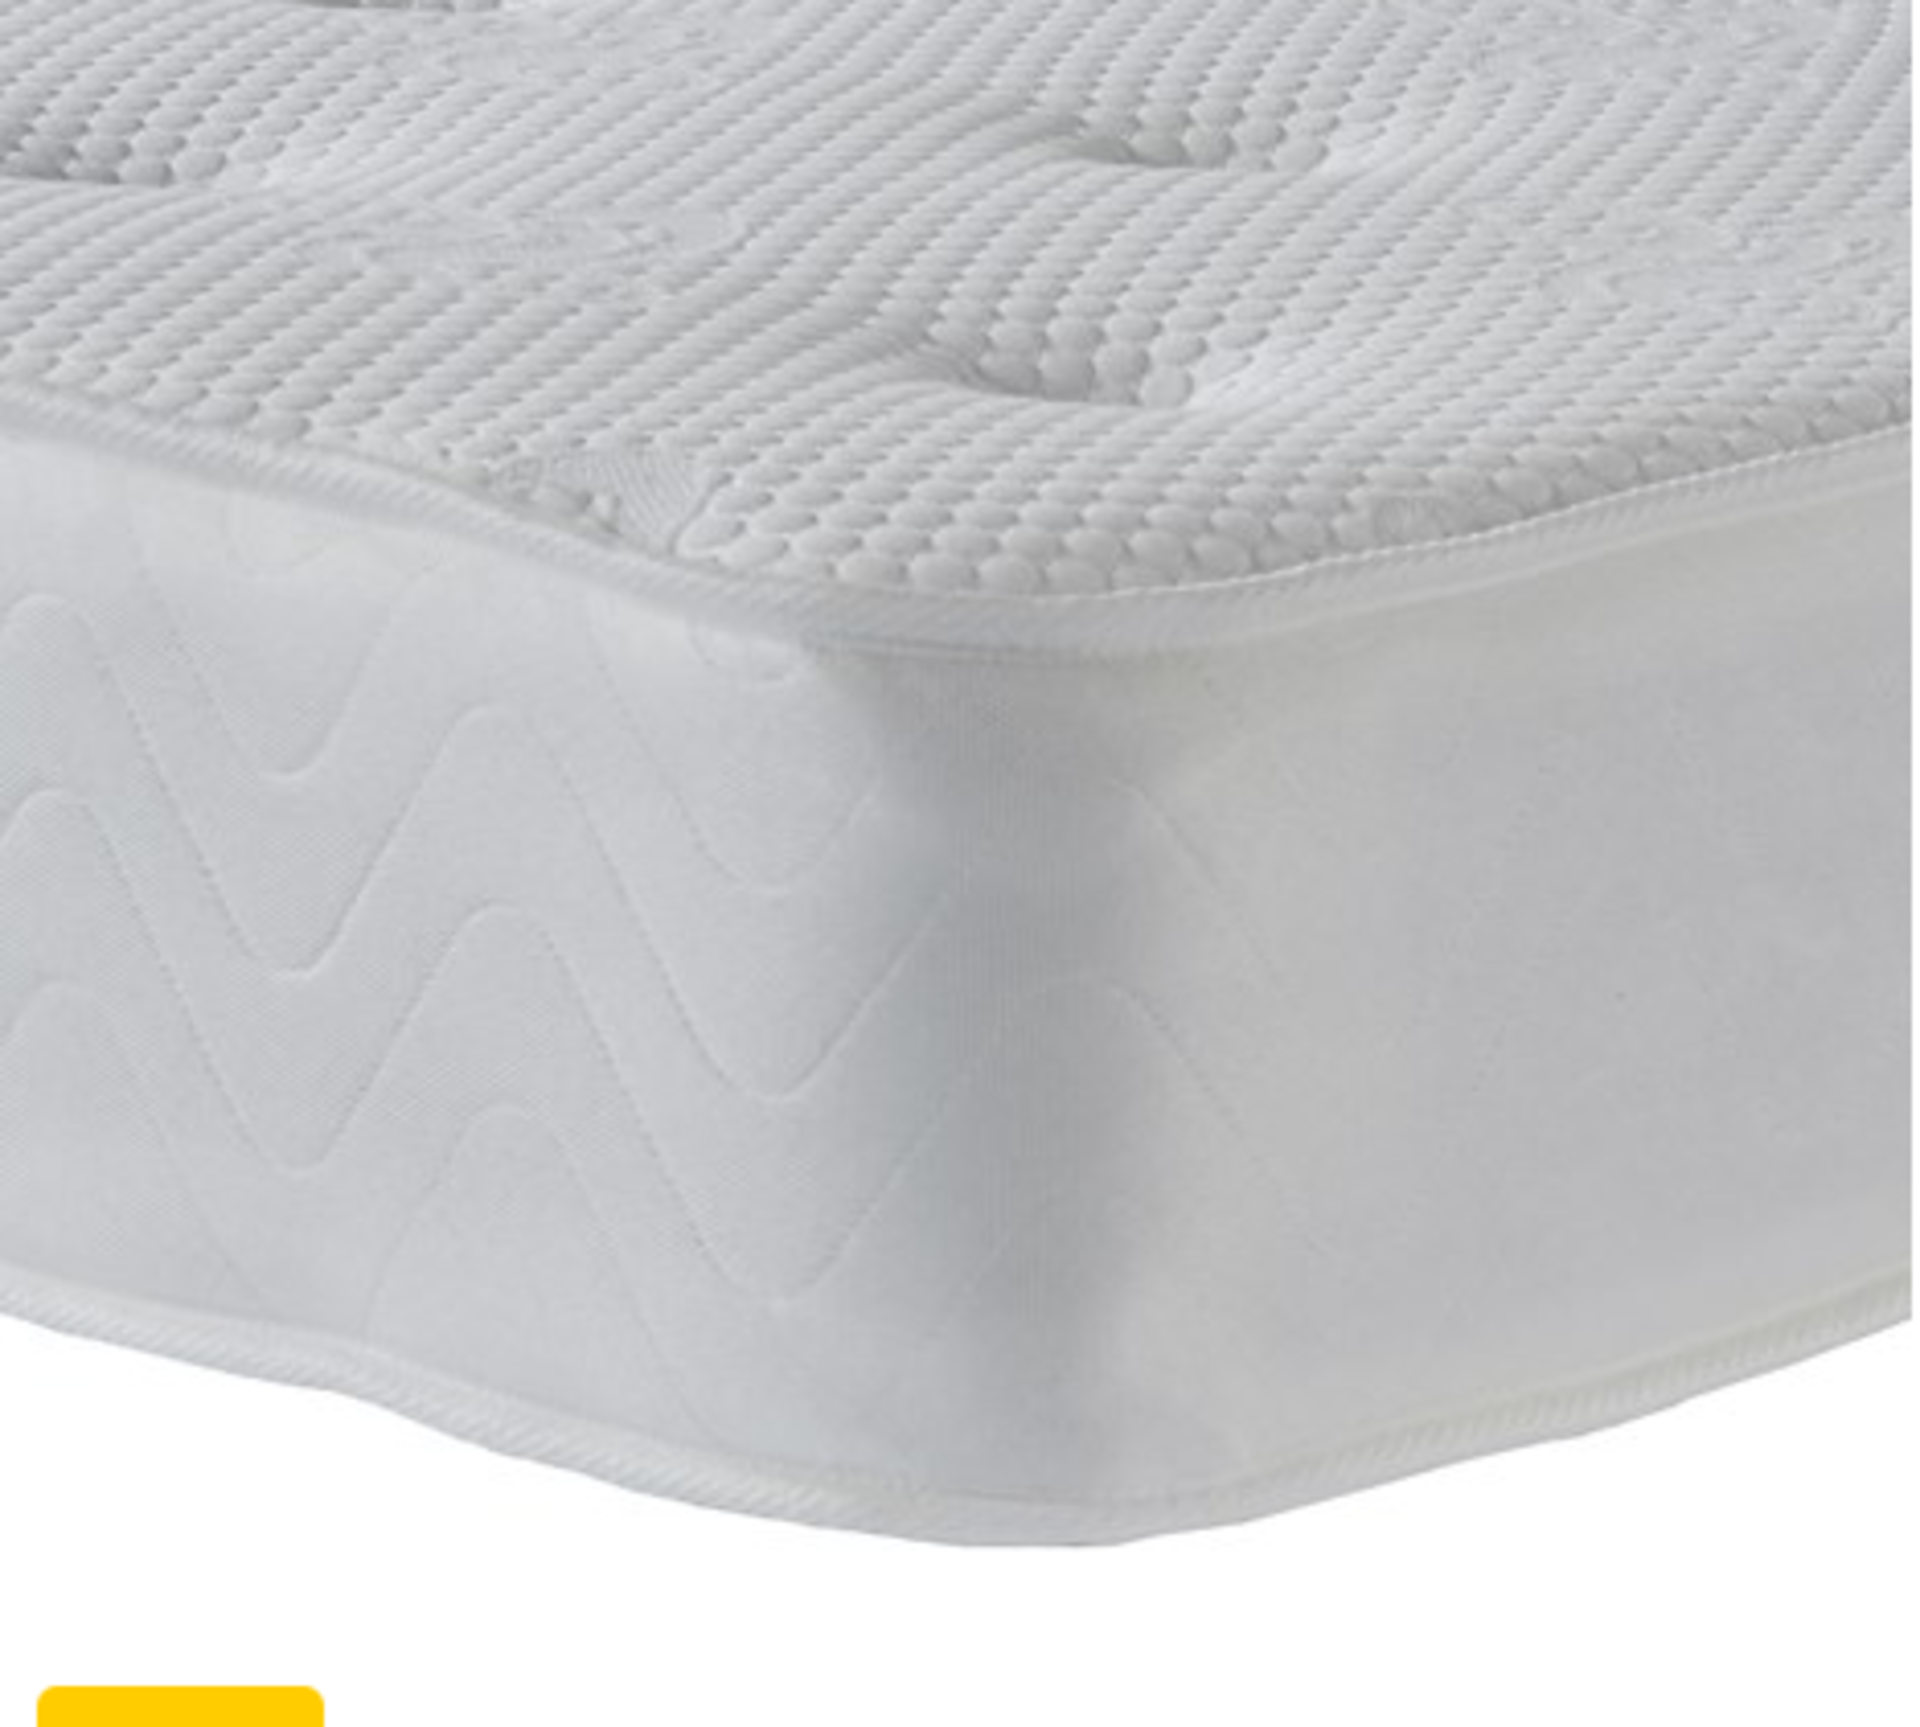 | 1X | SLEEPRIGHT GENOA BED MATTRESS 5FT KING SIZE | DIRTY MARKS PRESENT, DUE TO DAMAGED PACKAGING |